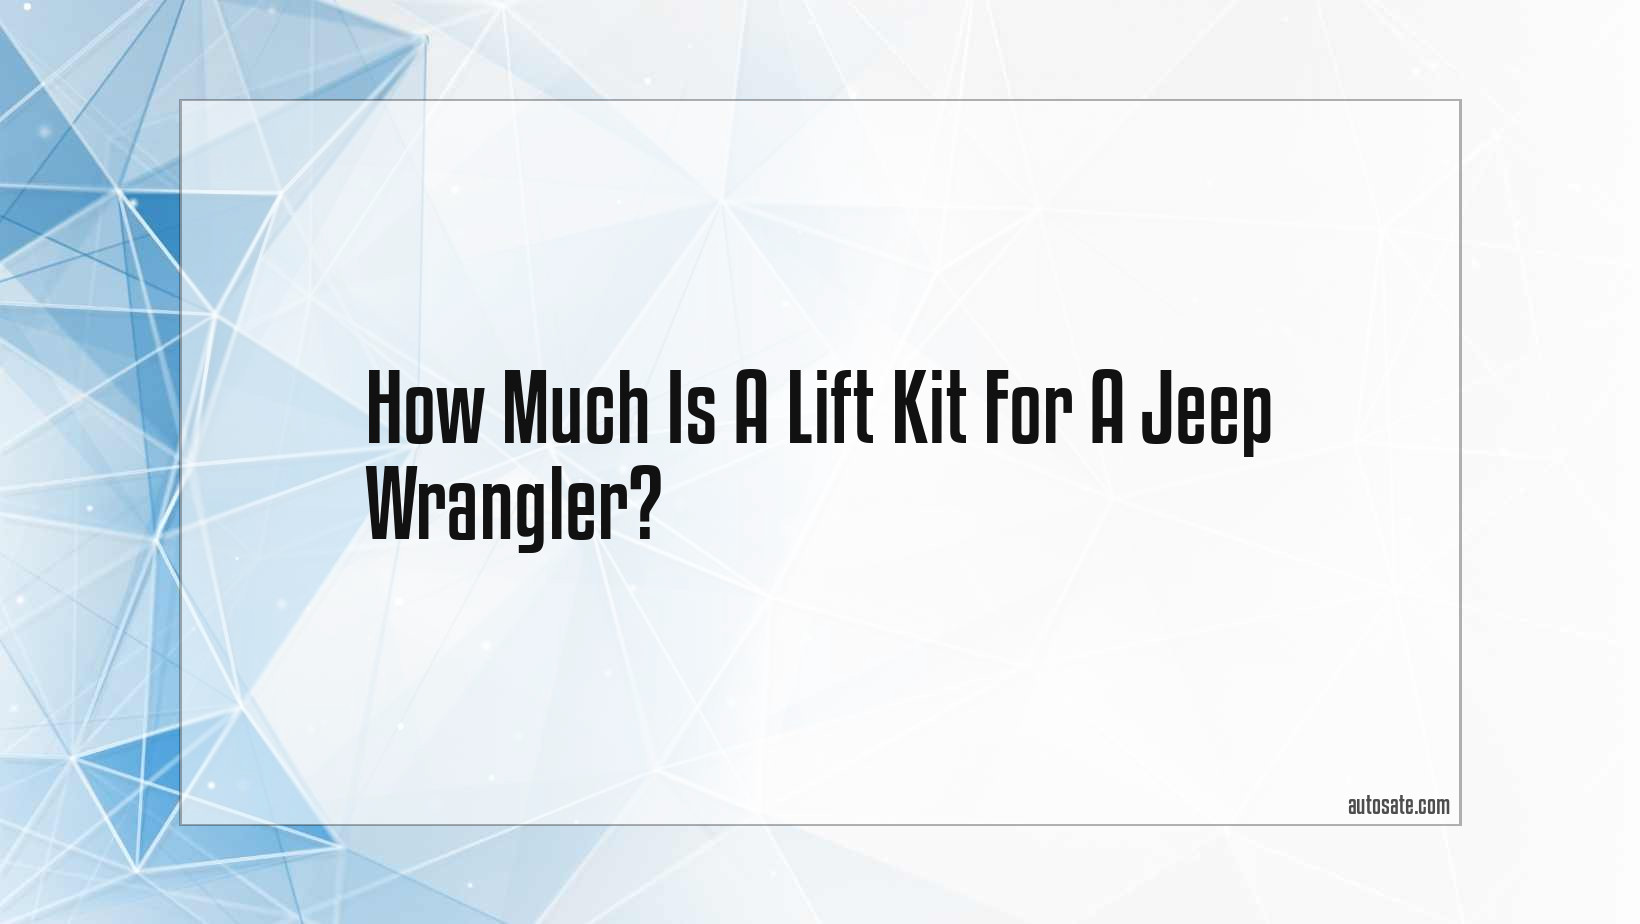 How Much Is A Lift Kit For A Jeep Wrangler